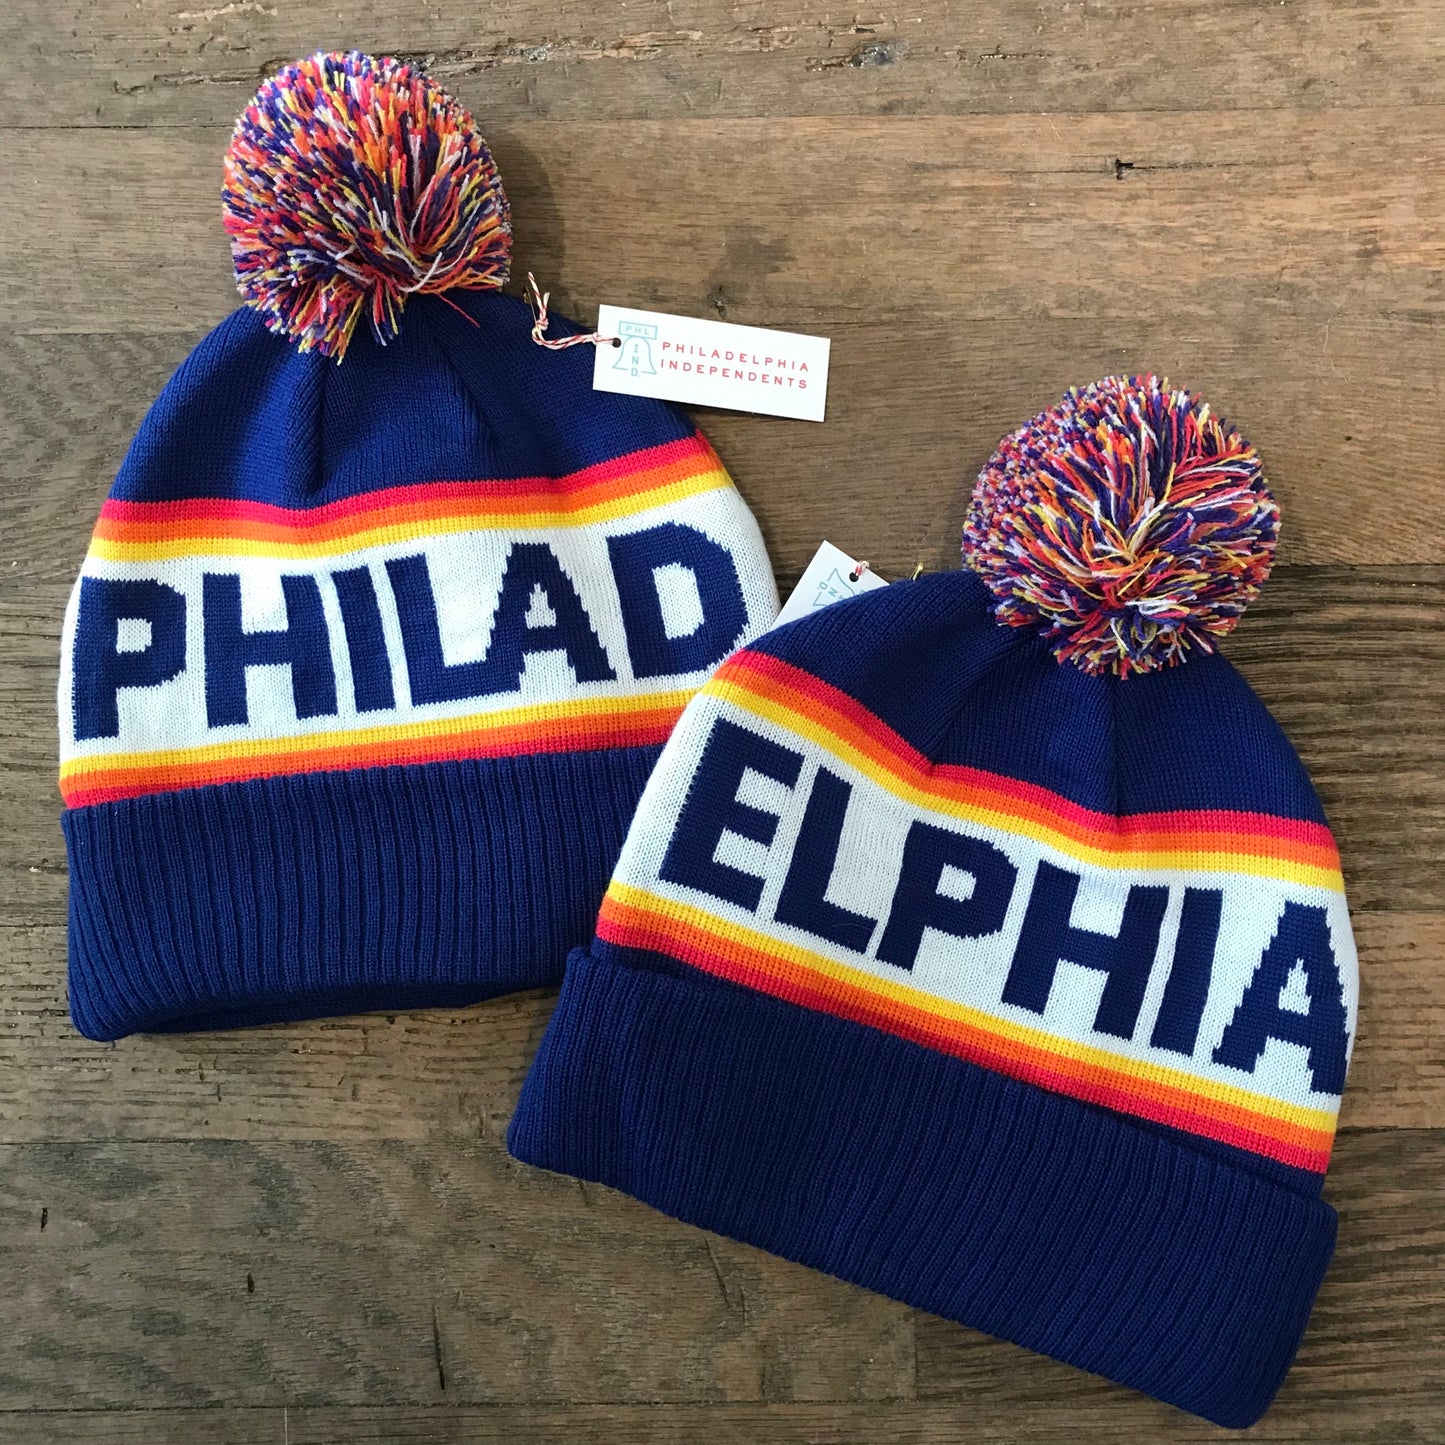 Two blue, double-sided knit South Fellini winter hats with pom-poms and "Philadelphia" written across them, displayed on a wooden surface.